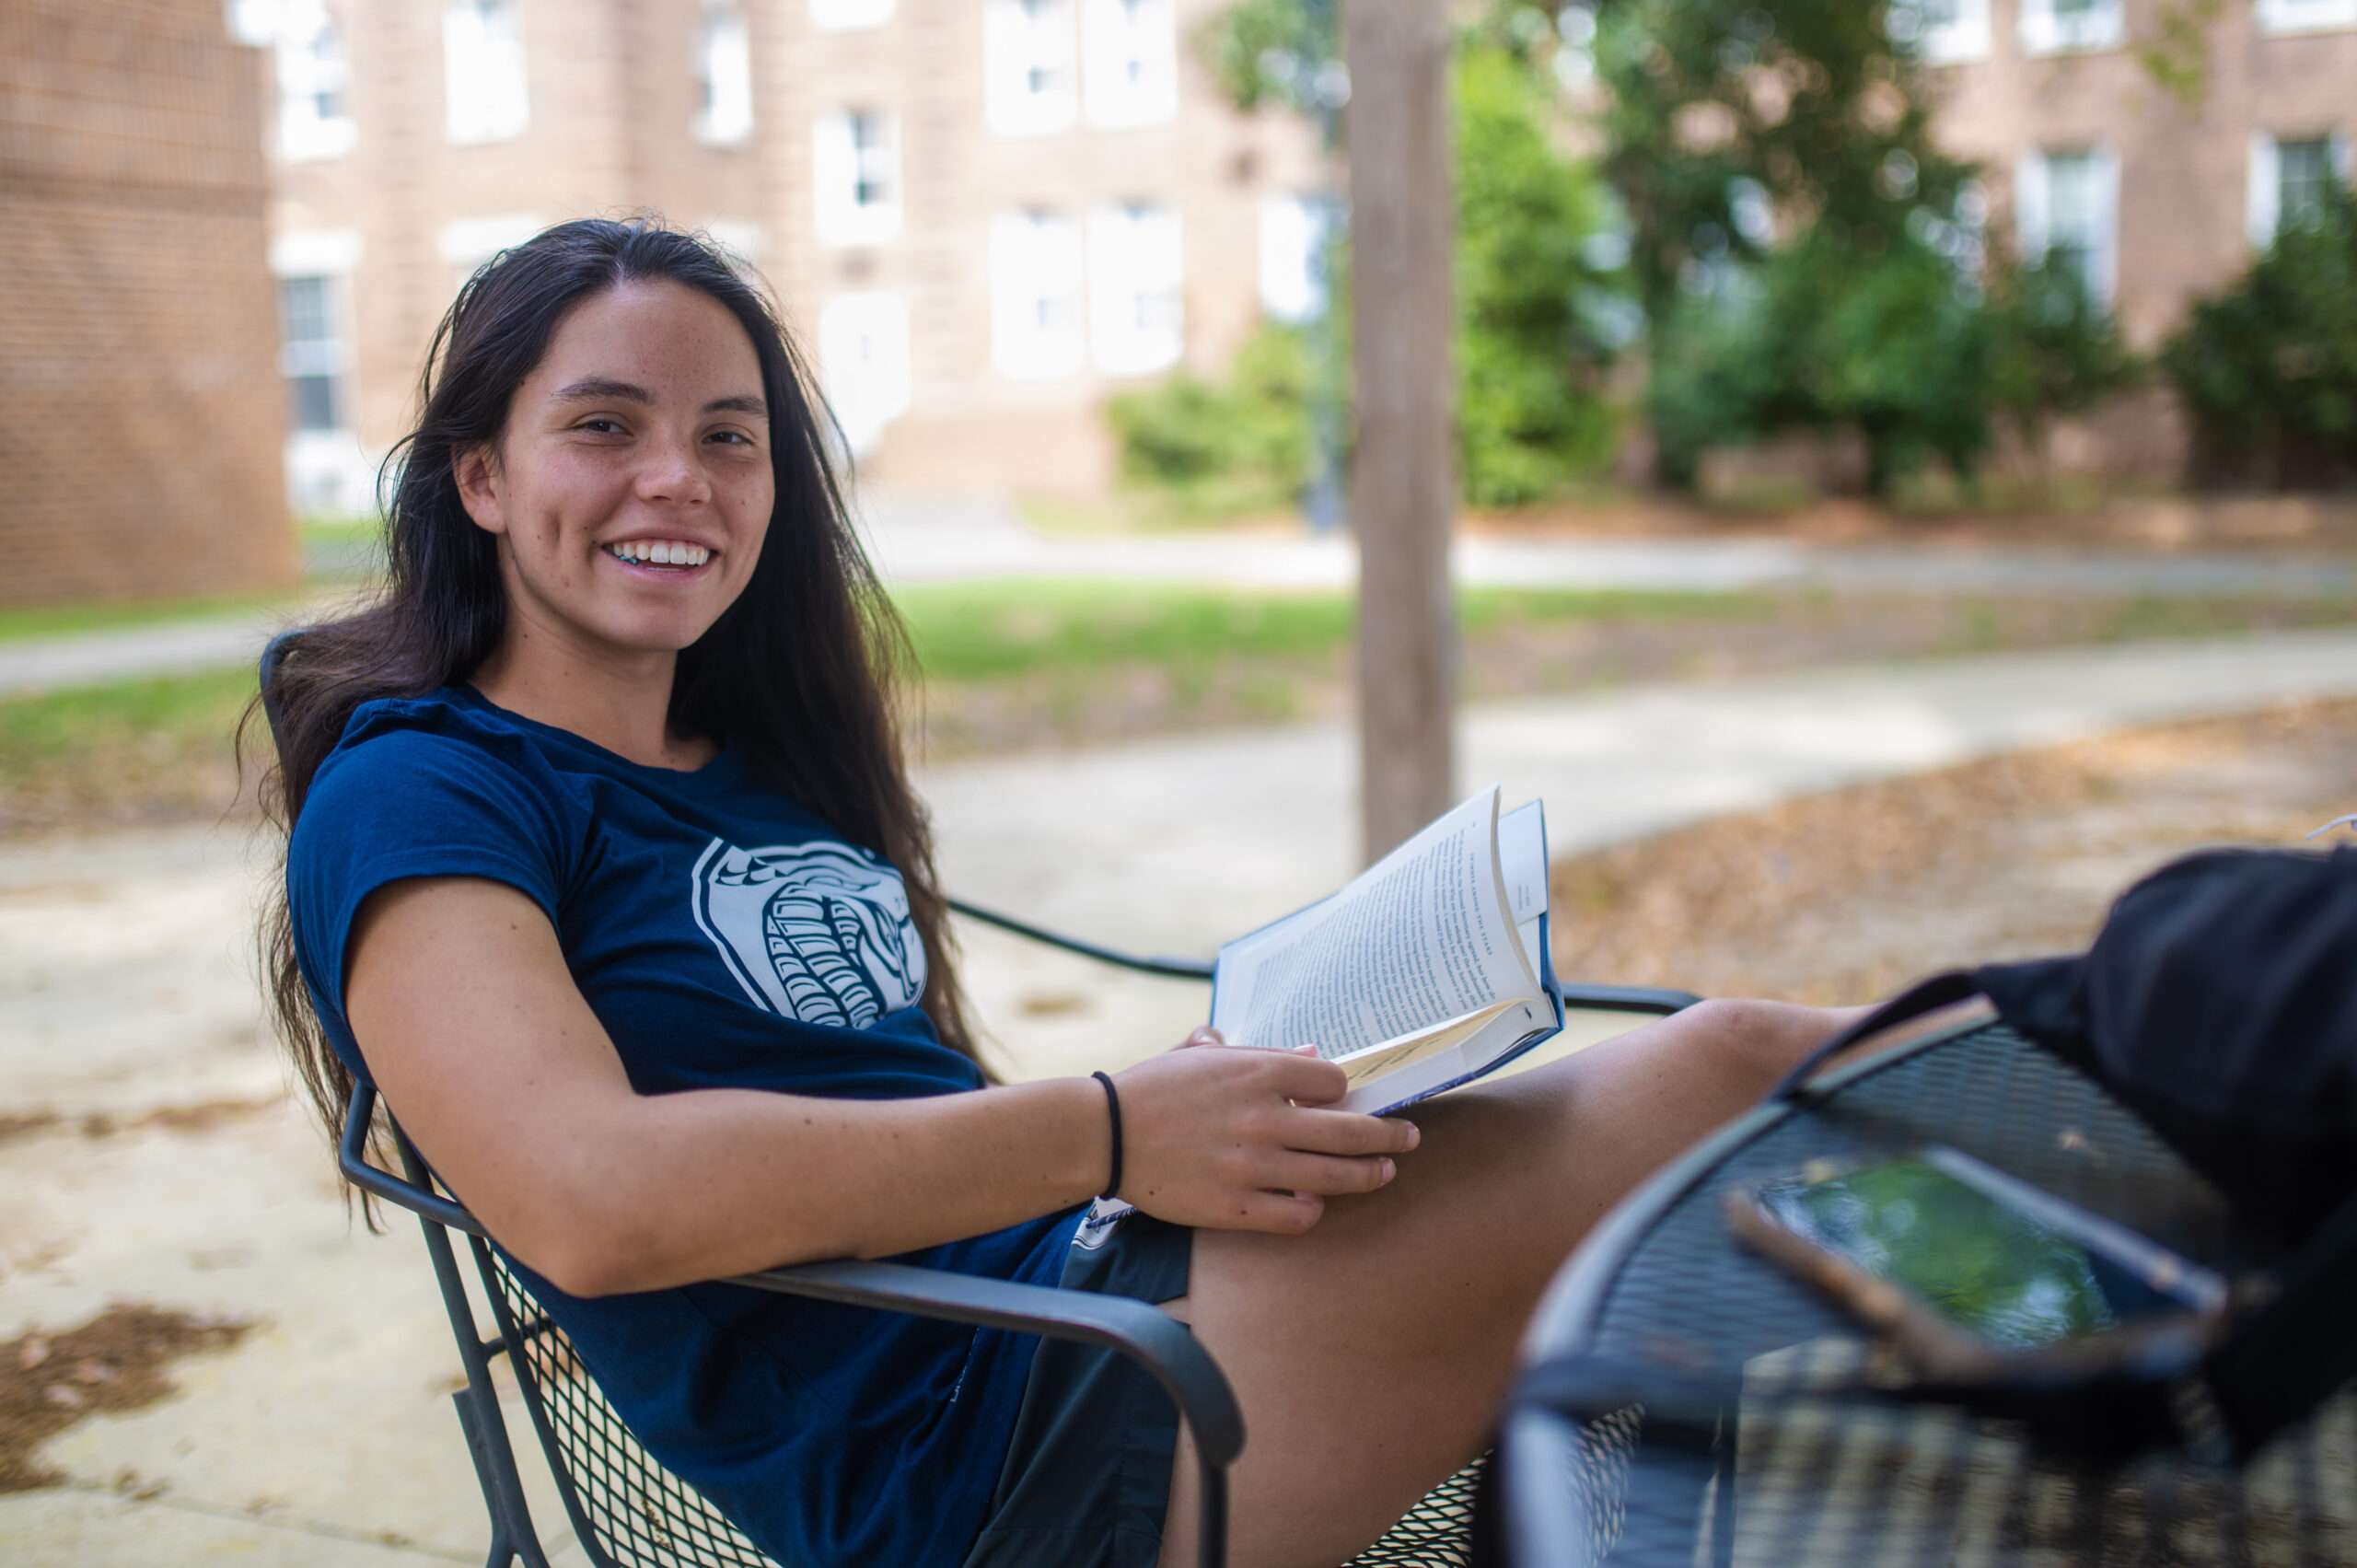 student lounges in a chair with a book in her hand smiling at the camera